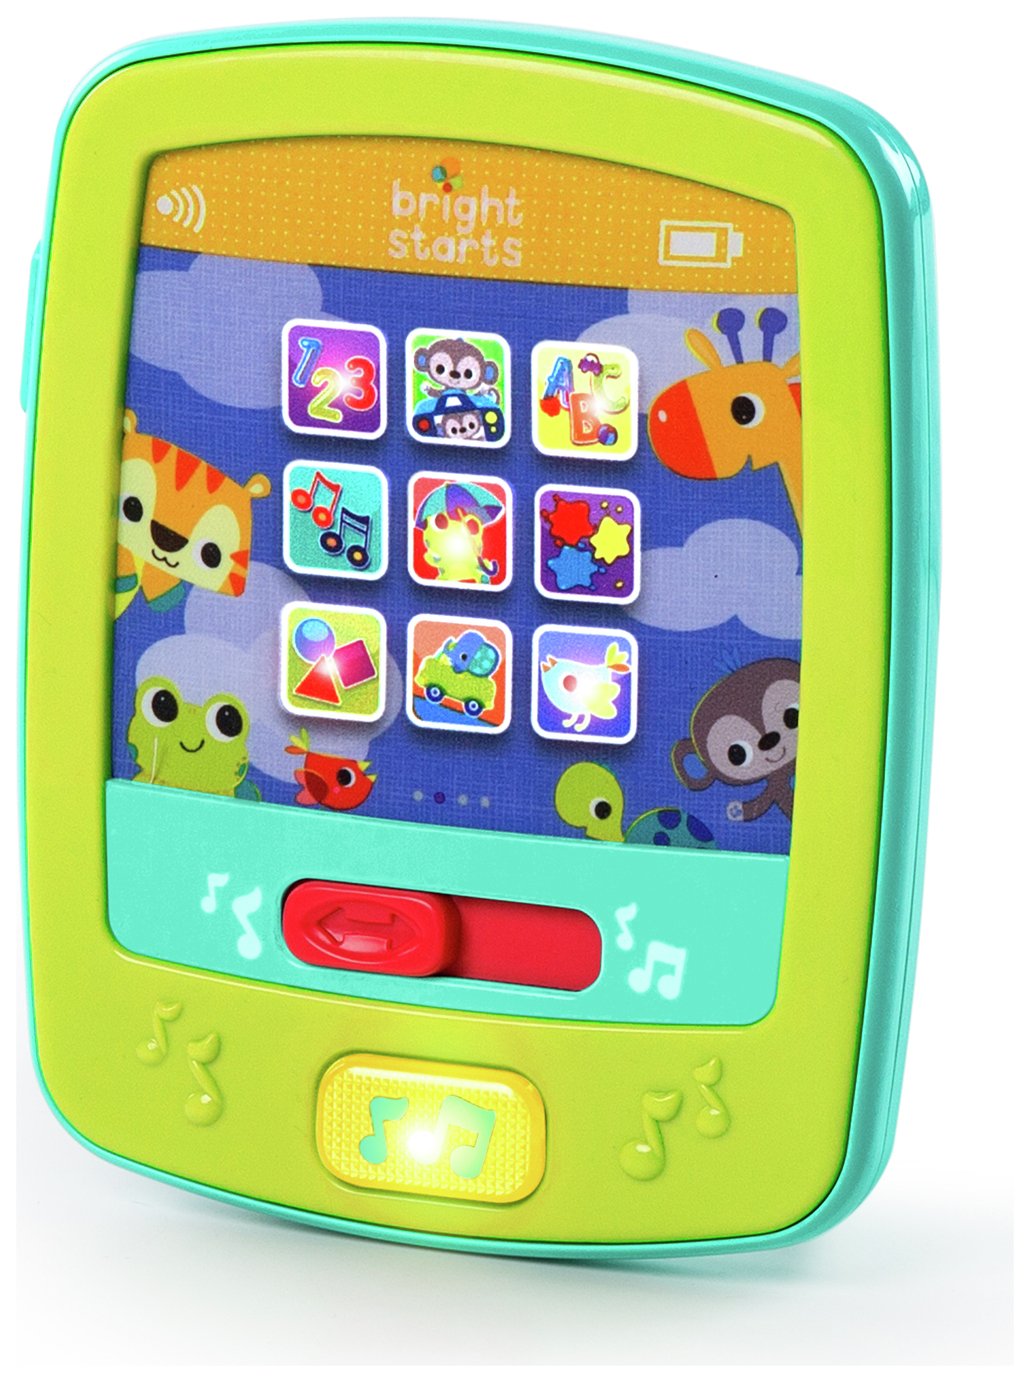 Bright Starts Lights & Sounds Fun Pad Activity Toy.